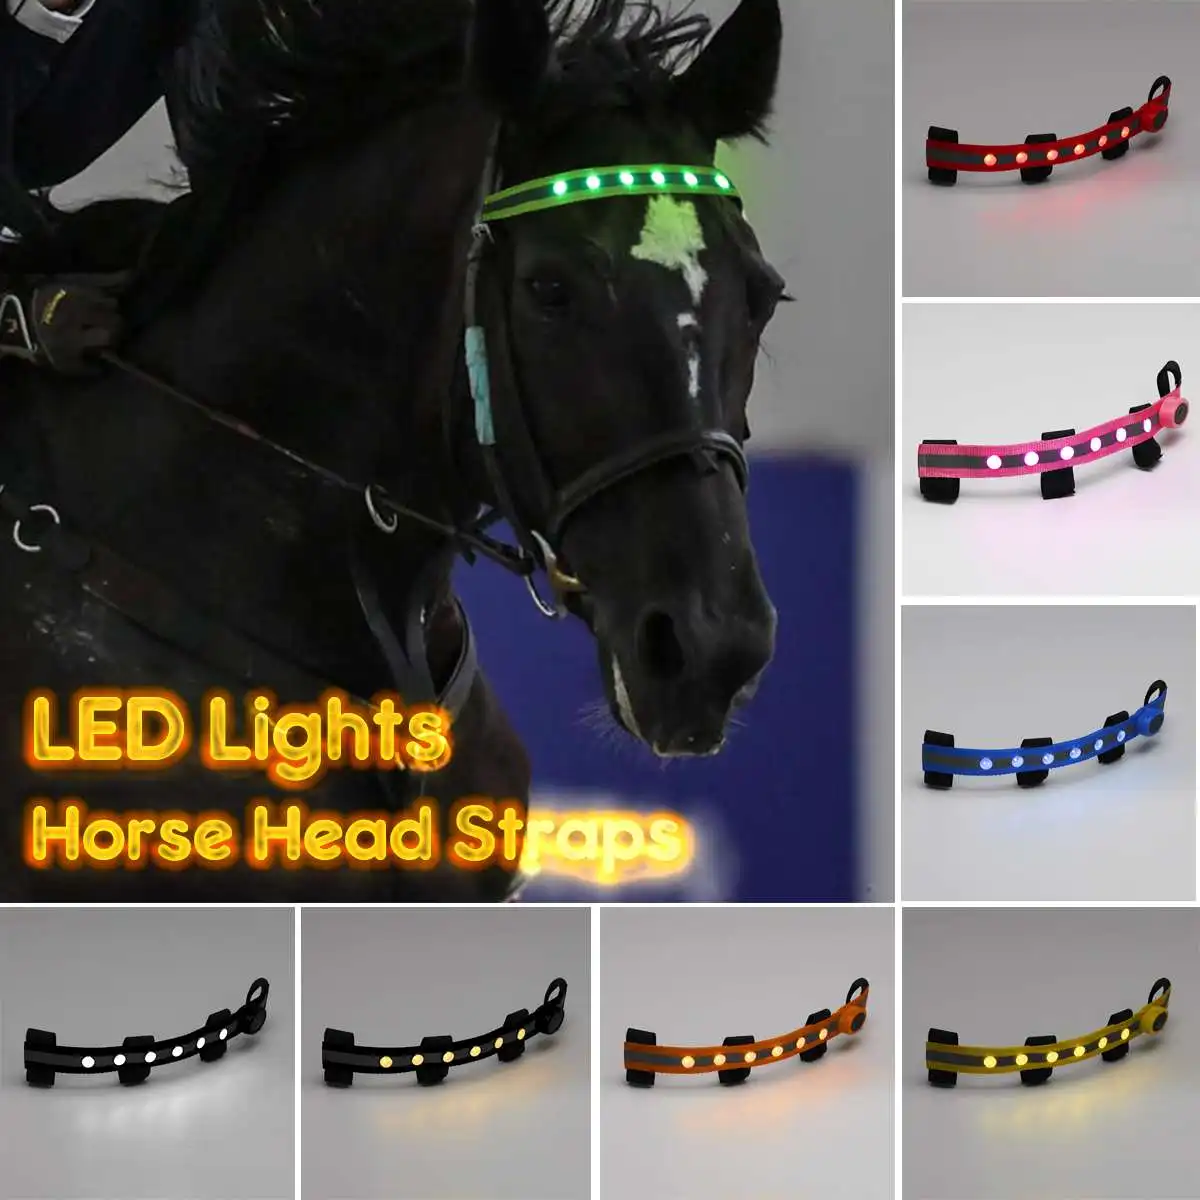 LED Horse Head Straps Night Visible Equestrian Equitation Strip Riding S8J6 